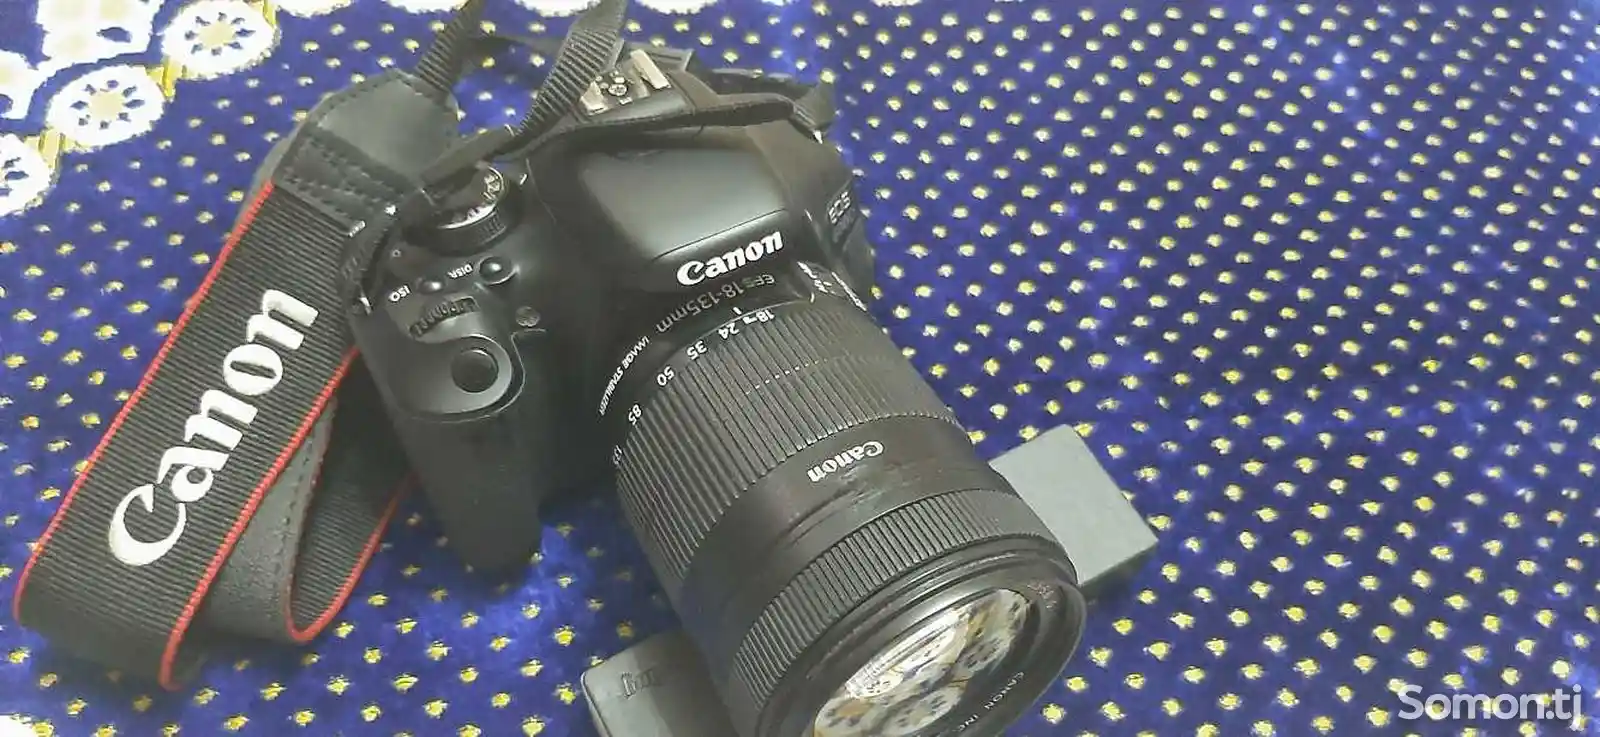 Canon Ds126311-7